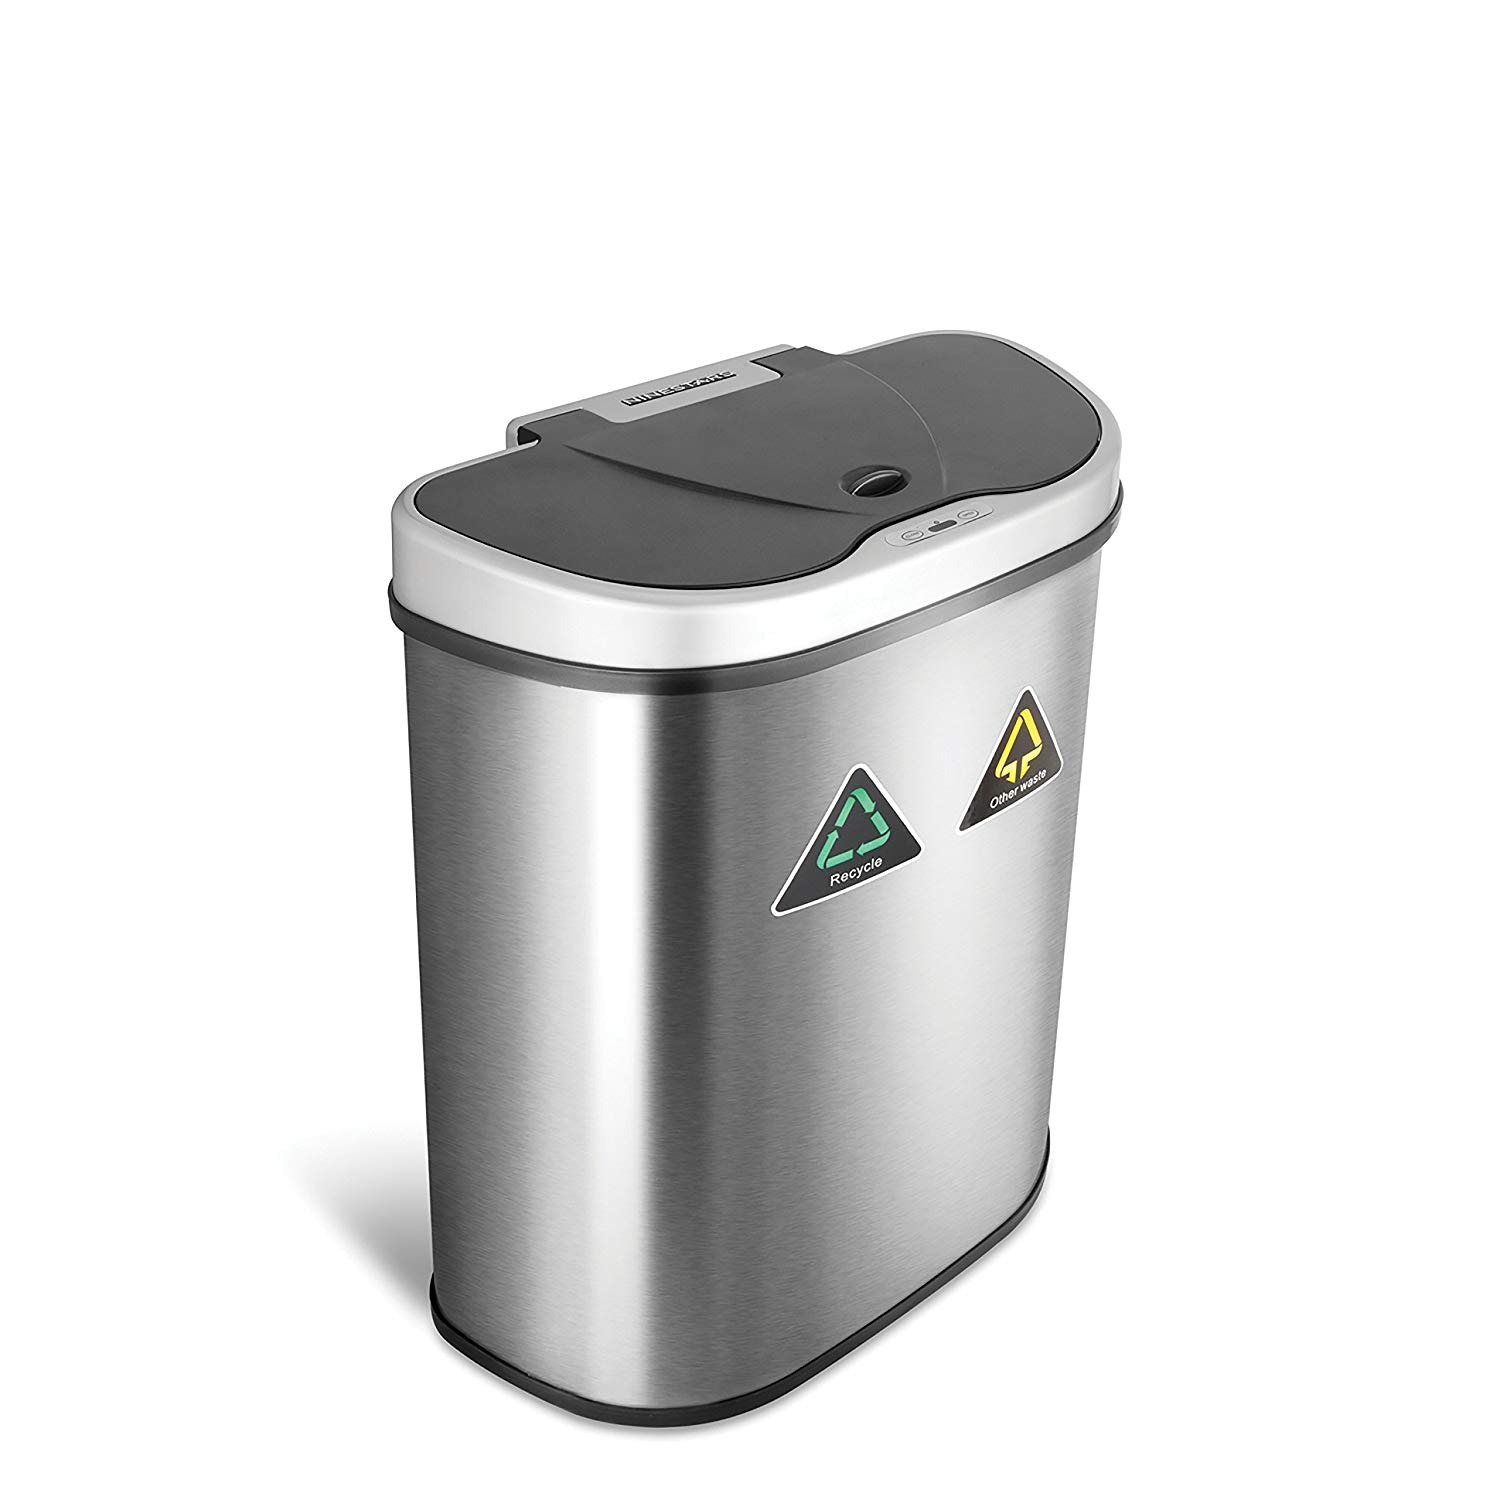 Anborry Bathroom Smart Touchless Trash Can 2.2 Gallon Automatic Motion